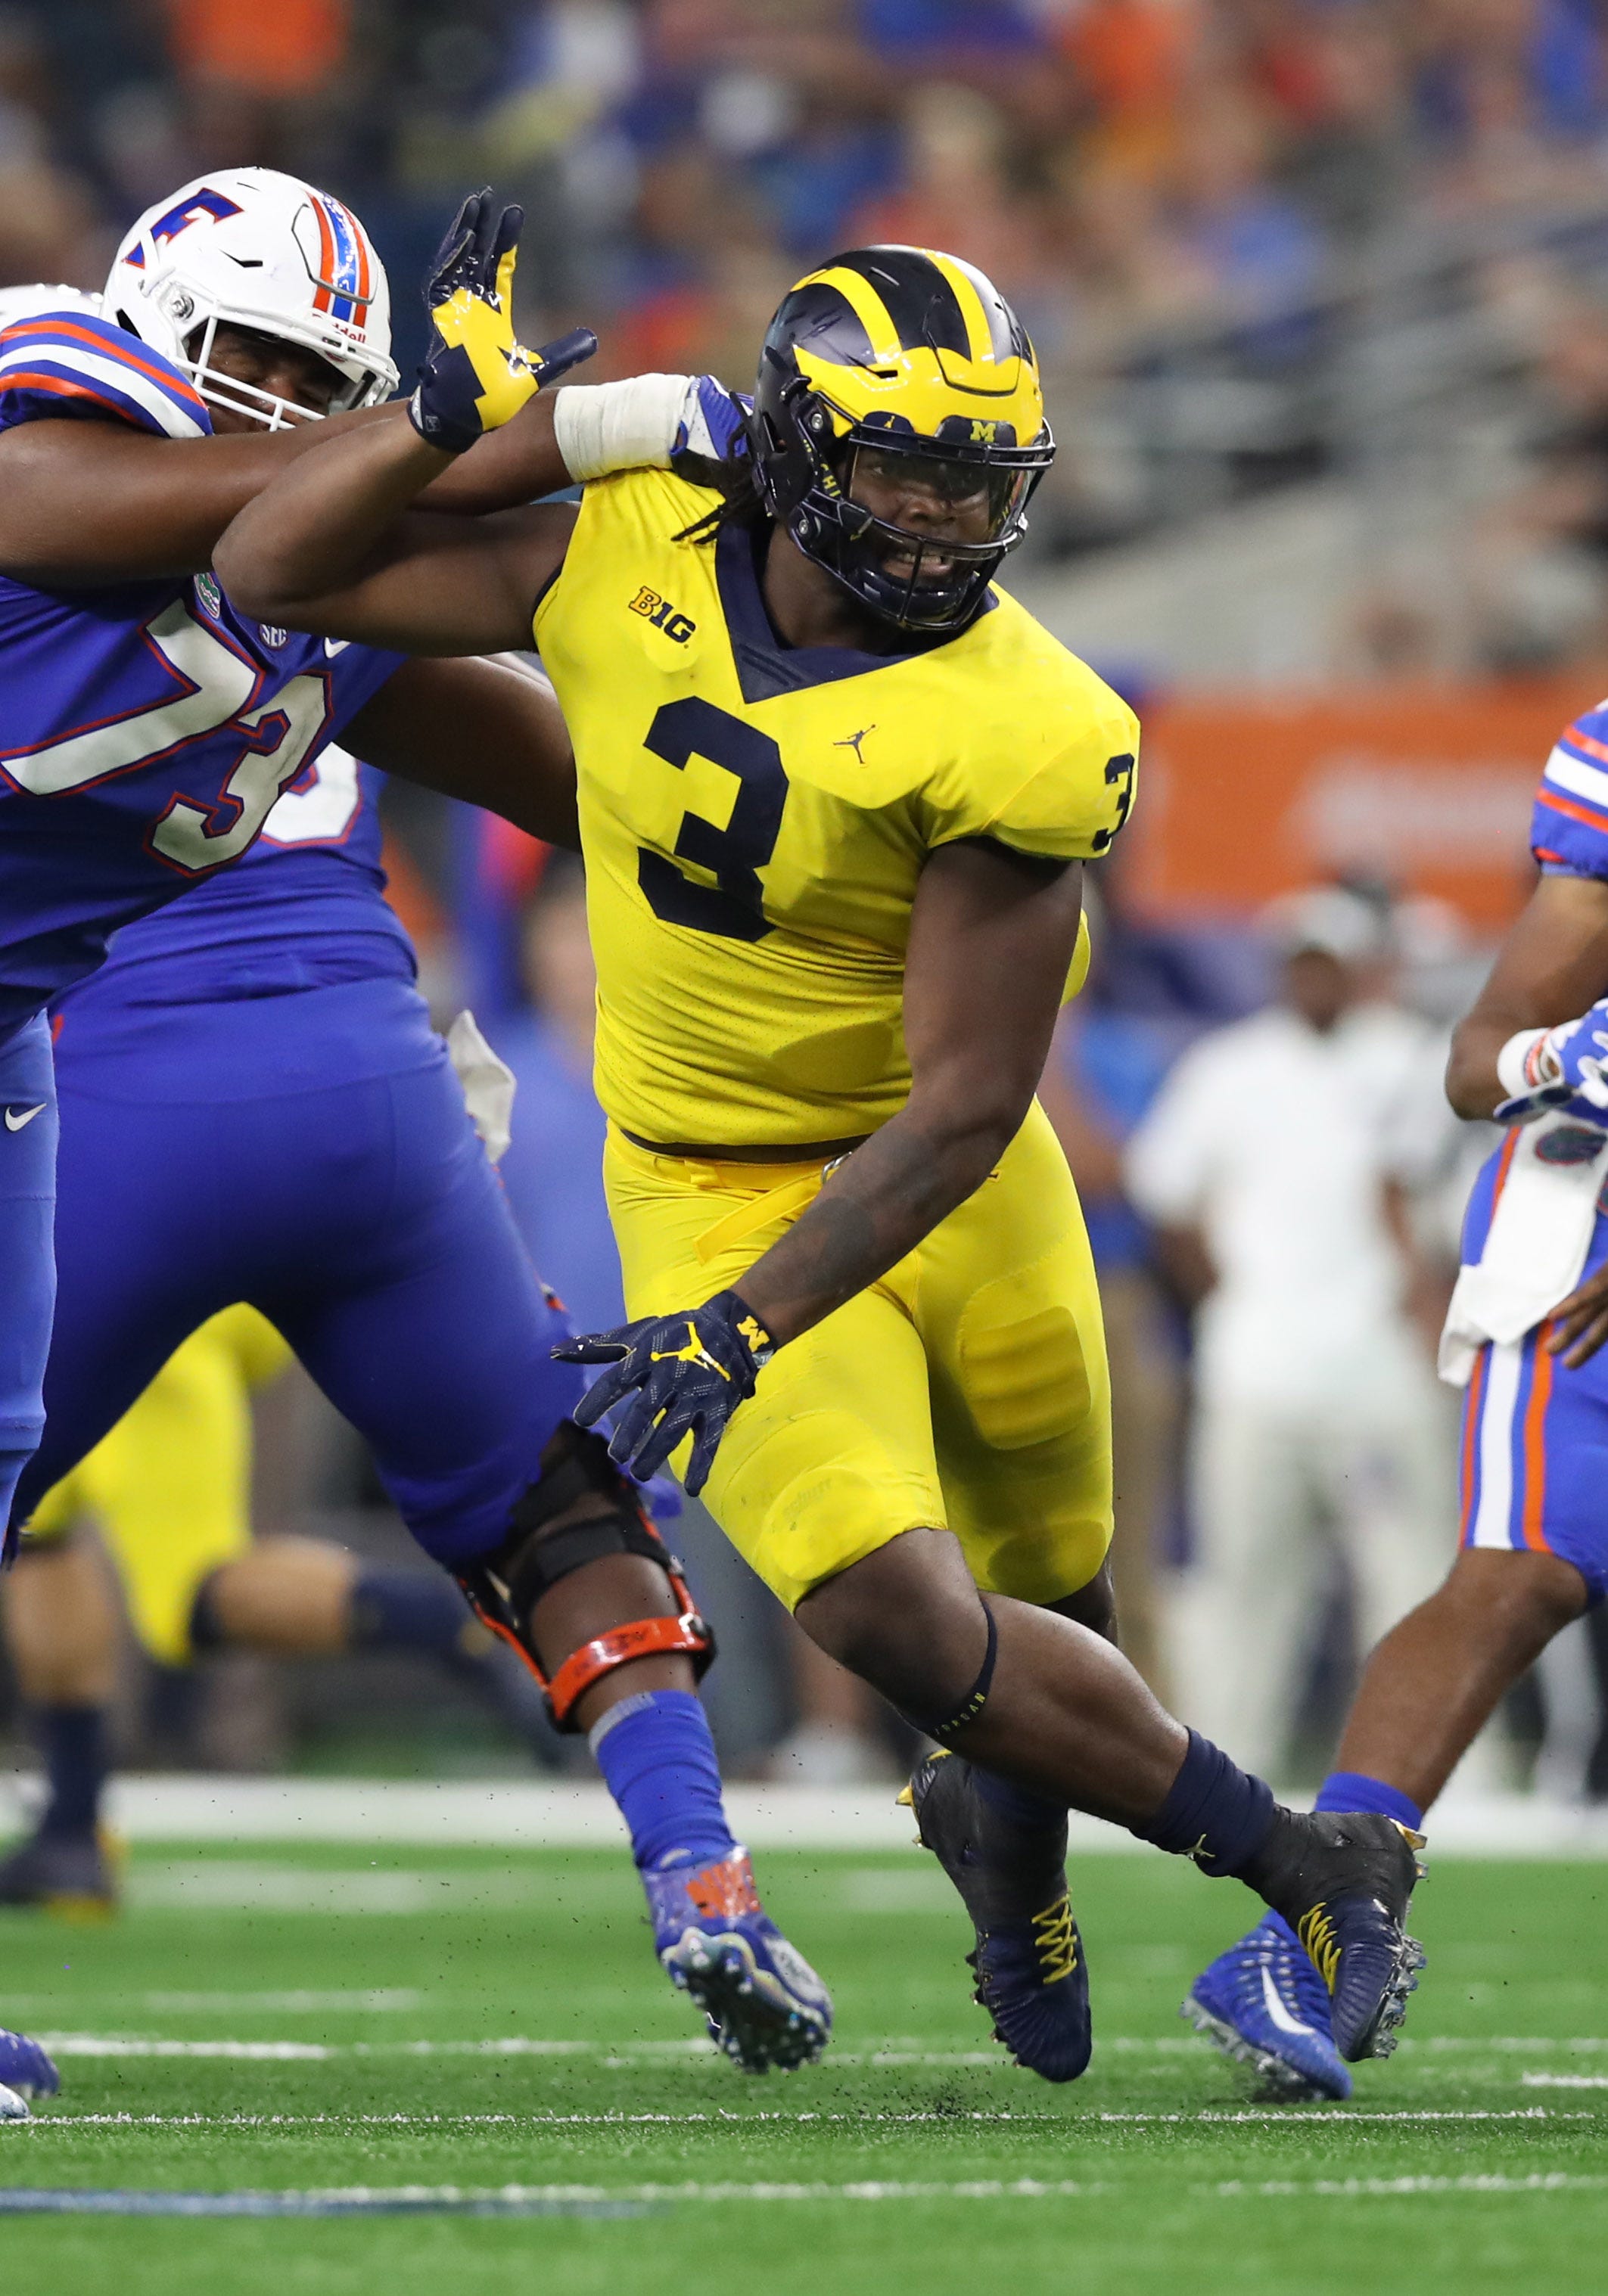 10 players who could be stars of the NFL scouting combine: Rashan Gary, D.K. Metcalf could seize spotlight